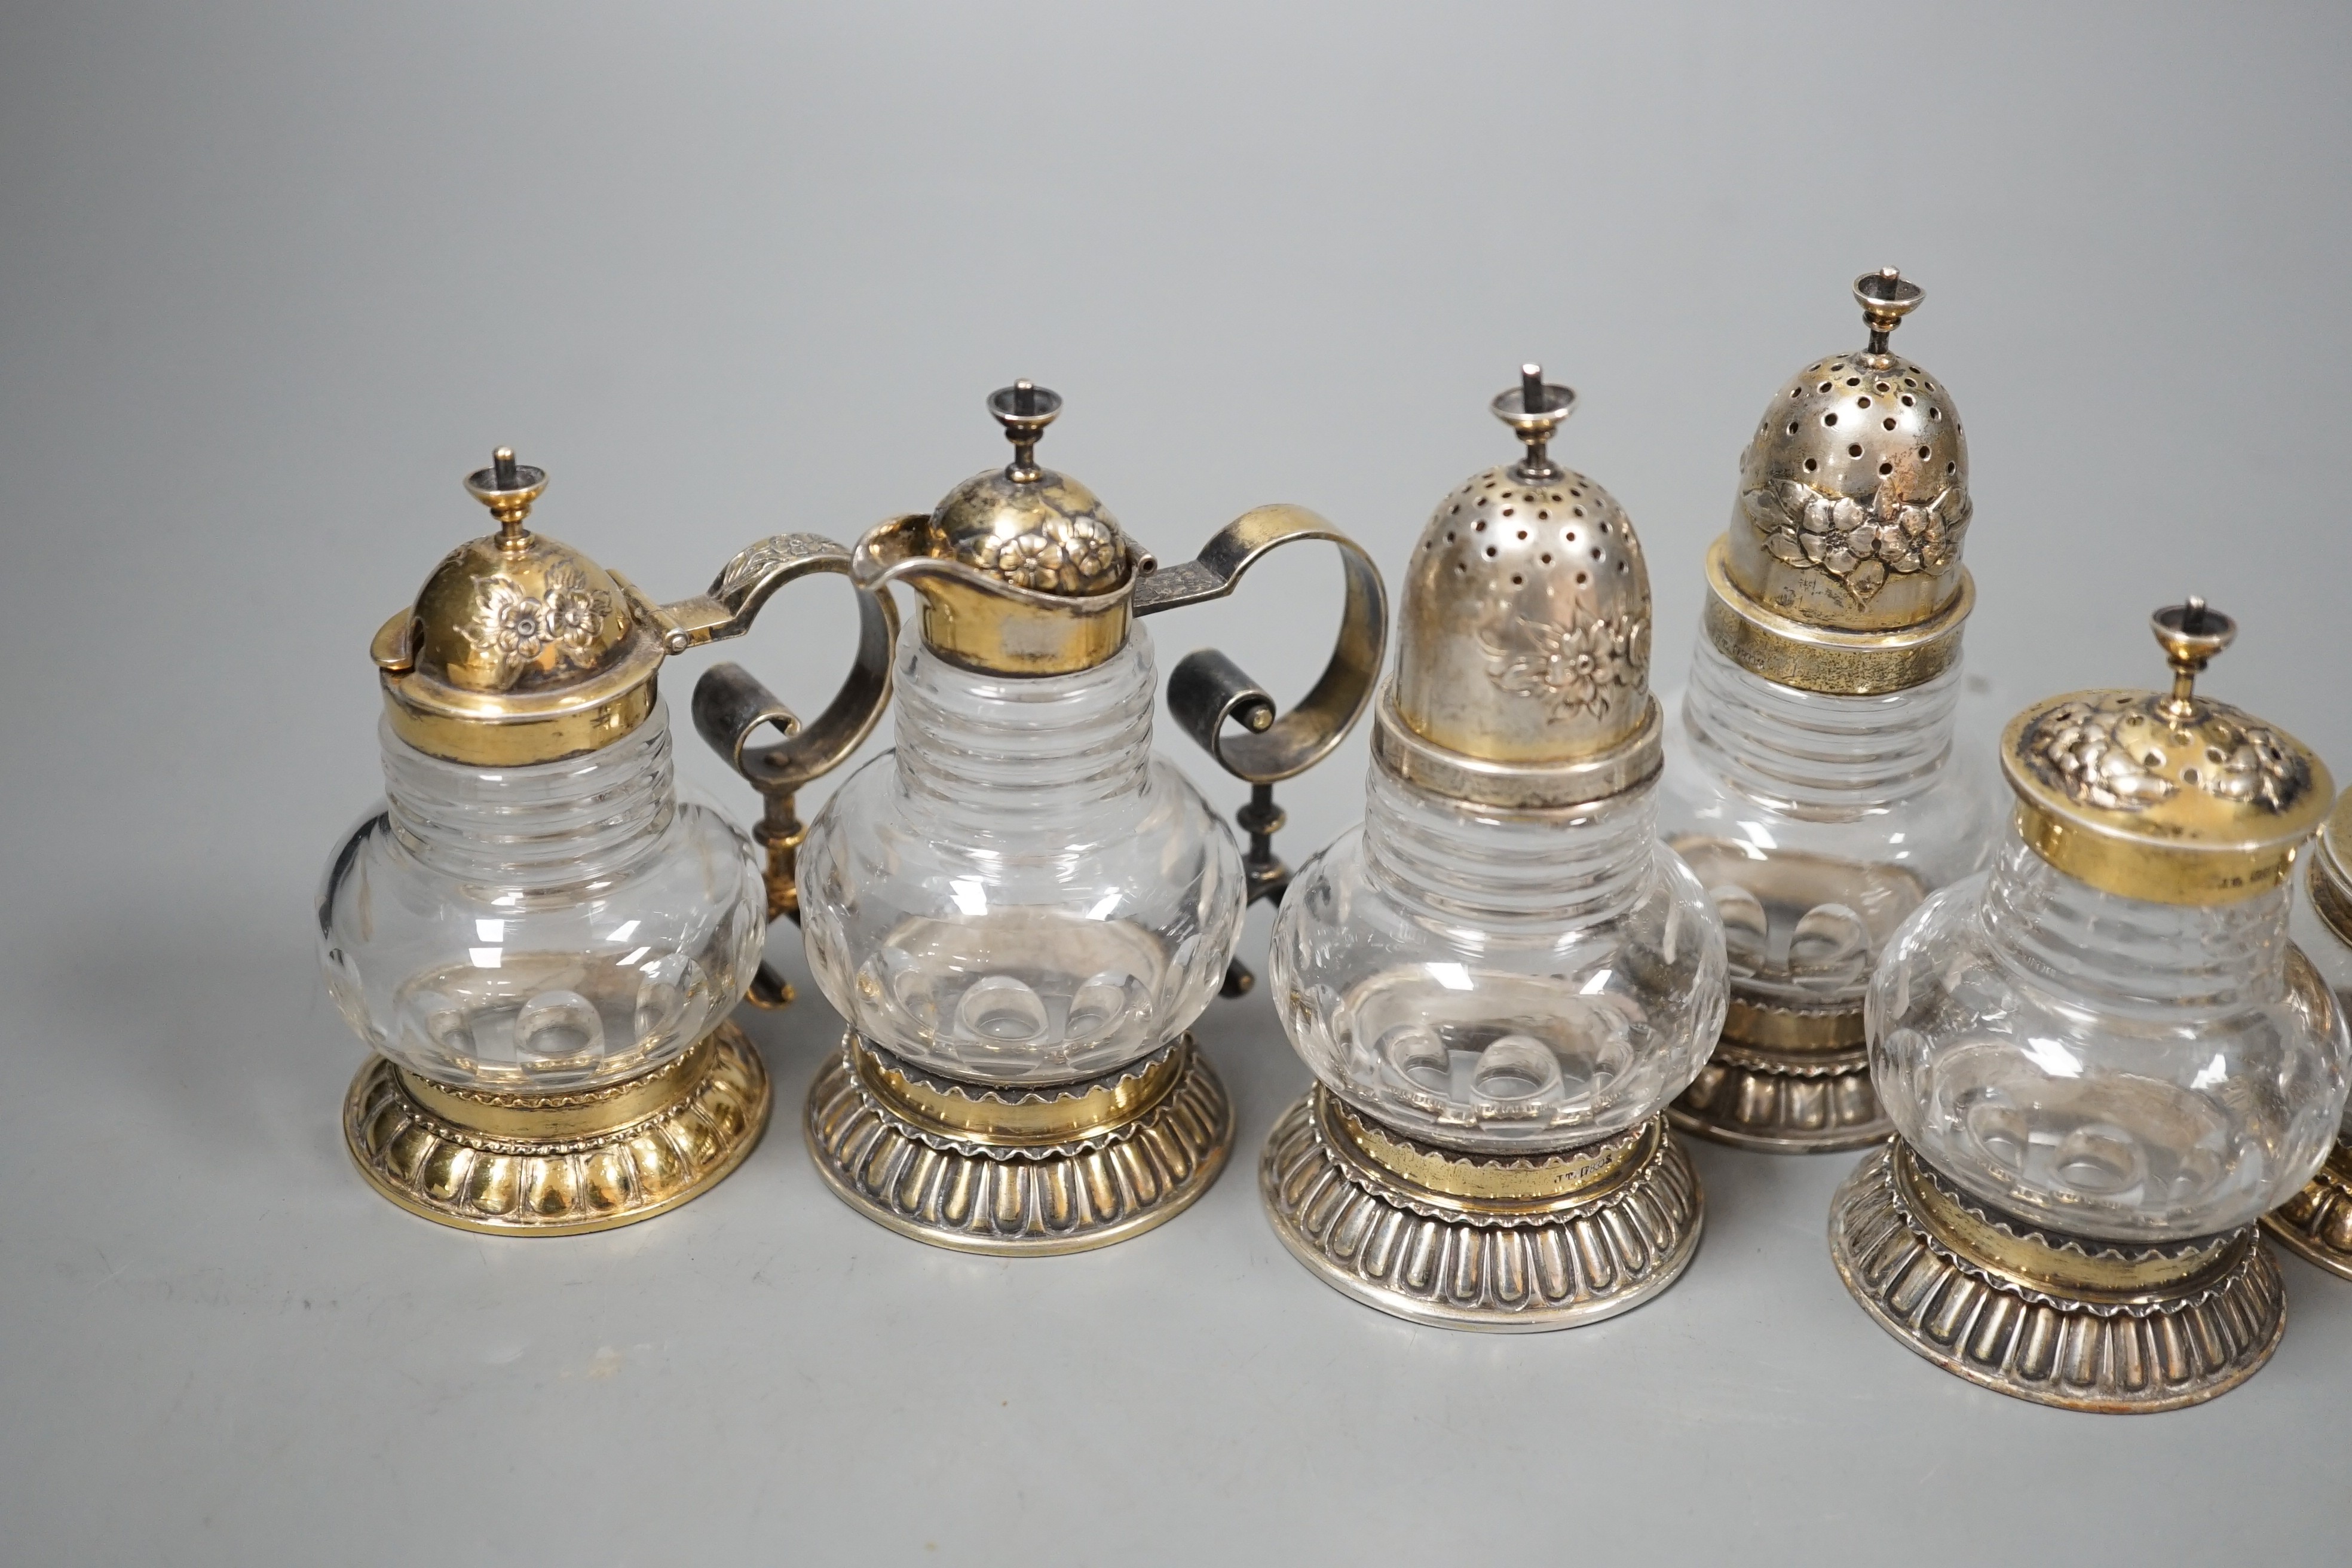 A late 19th/early 20th century Norwegian 830 standard gilt white metal mounted glass six piece cruet set, possibly by J. Tostrup, two pieces unmarked, tallest 97mm.